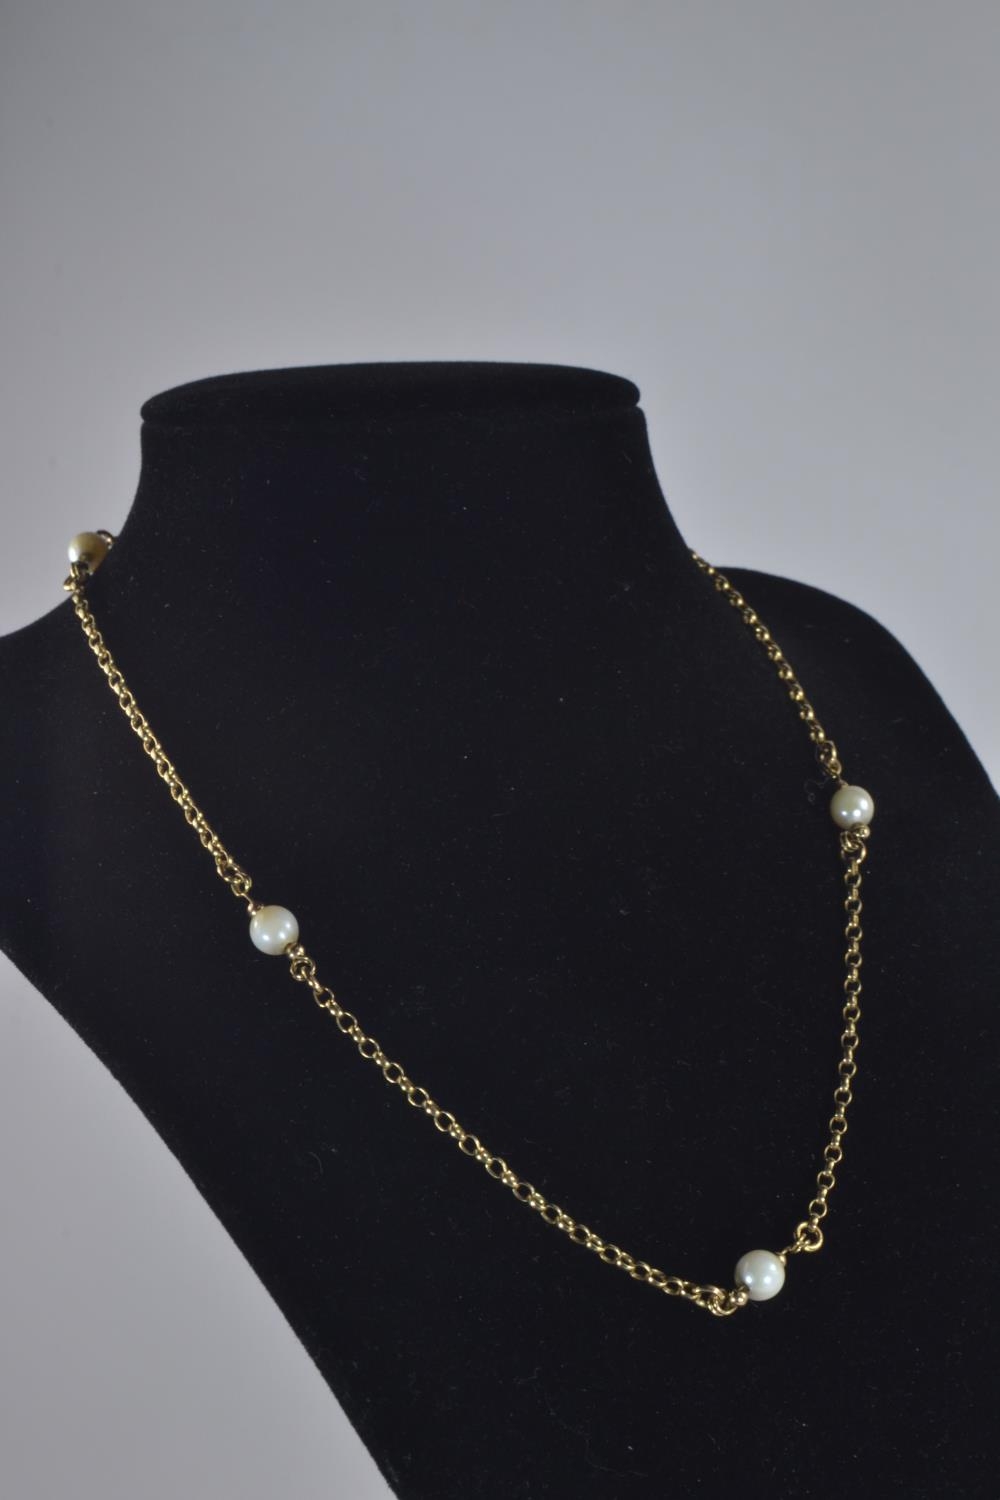 Yellow metal and pearl necklace, tests positive for 9ct gold, circumference 400mm, gross weight 6.45